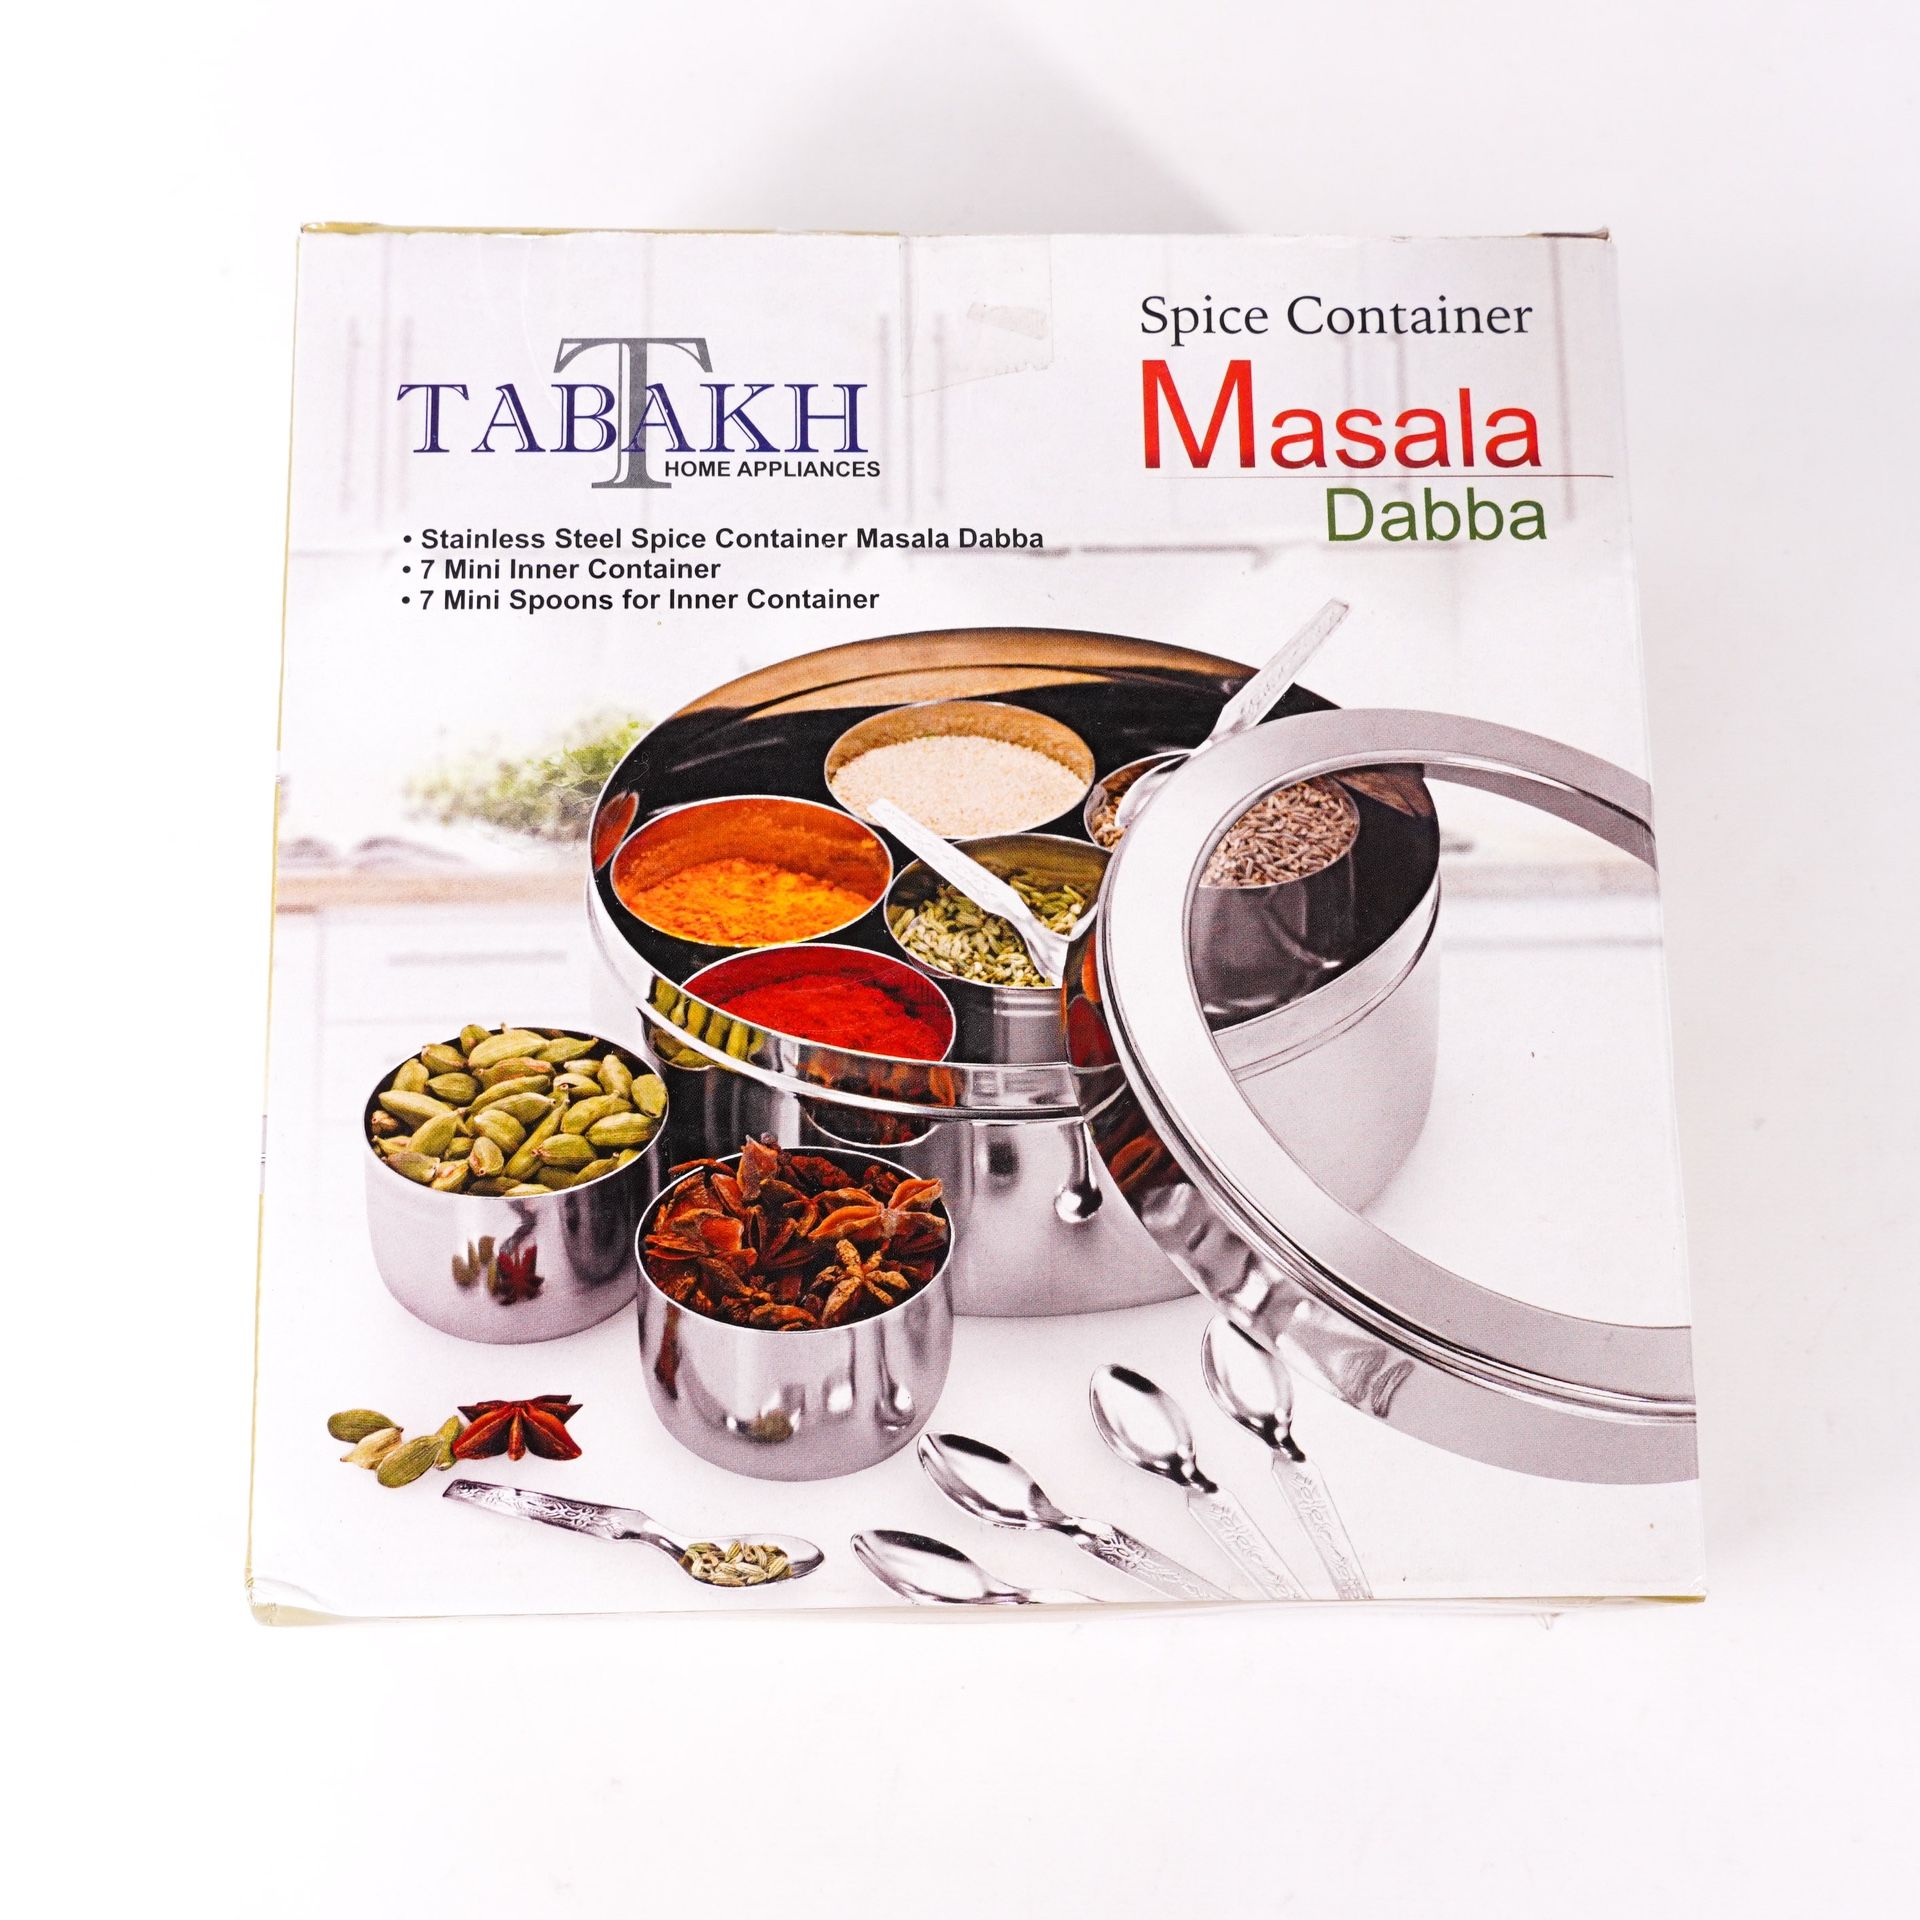 NEW Spice Container Masala Dabba by Tabakh 7 Mini Containers 7 Mini Spoons NIB